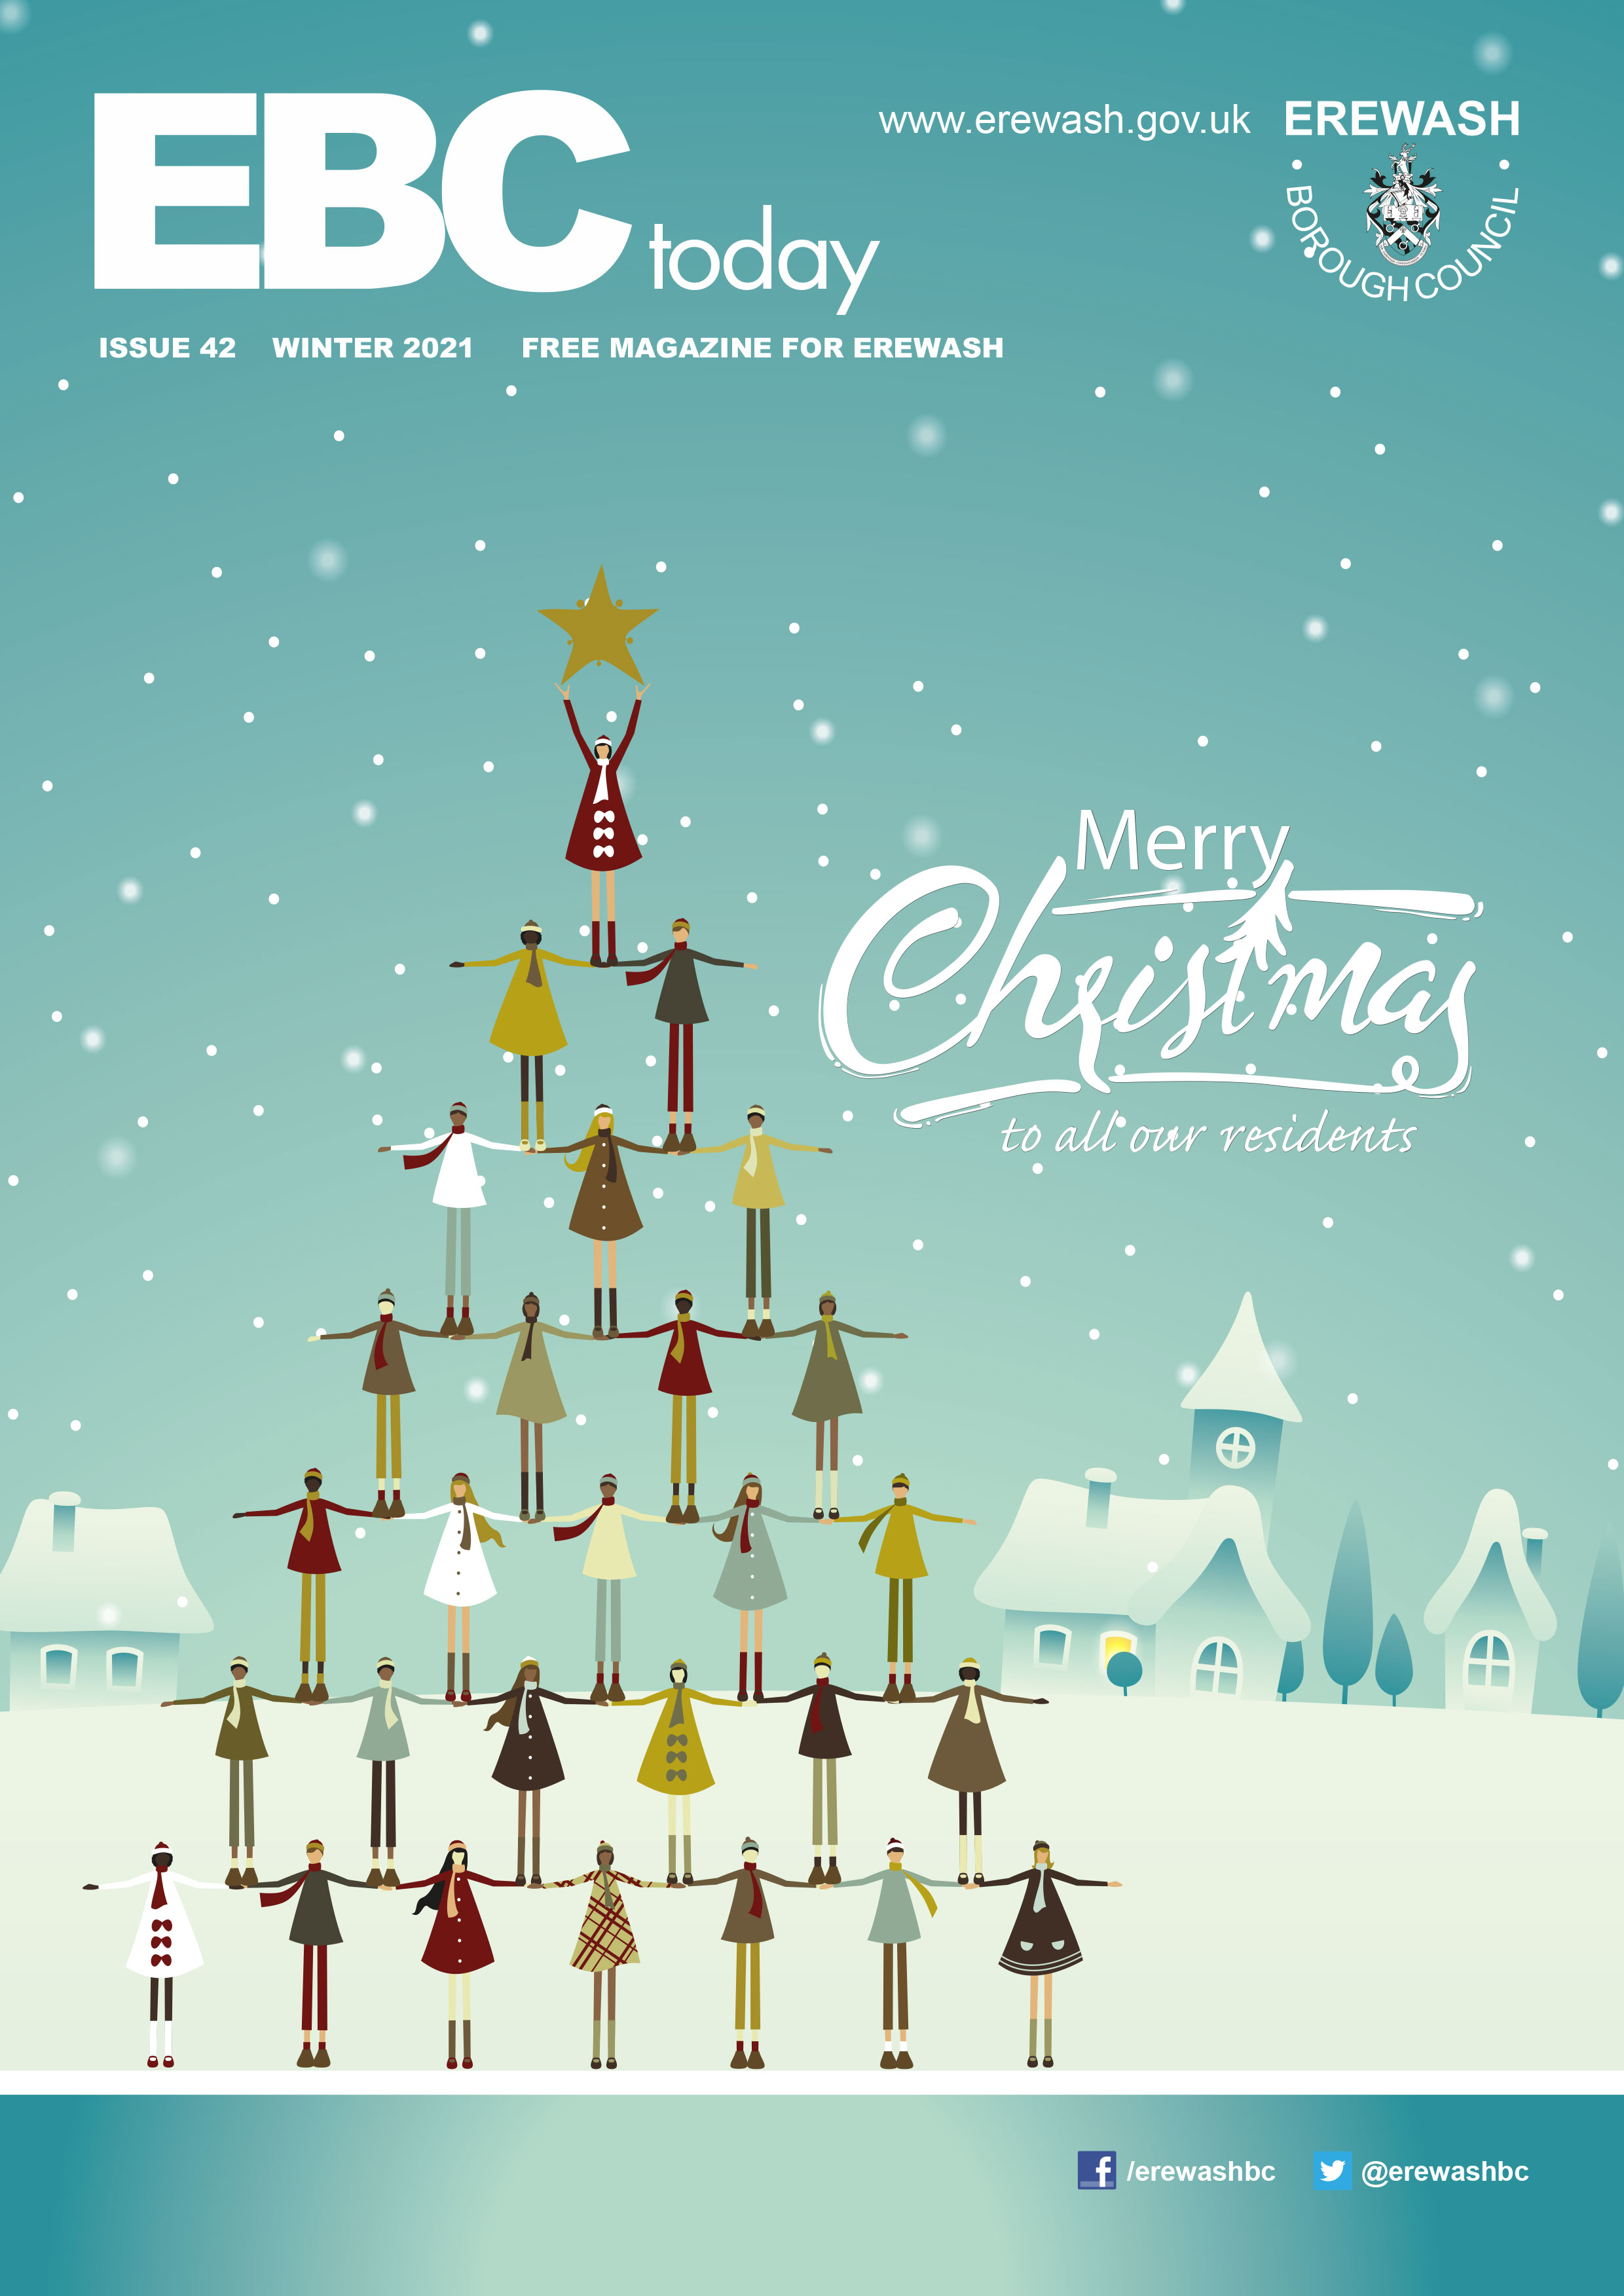 The front cover reads 'Merry Christmas' with a Christmas tree built from cartoon people.